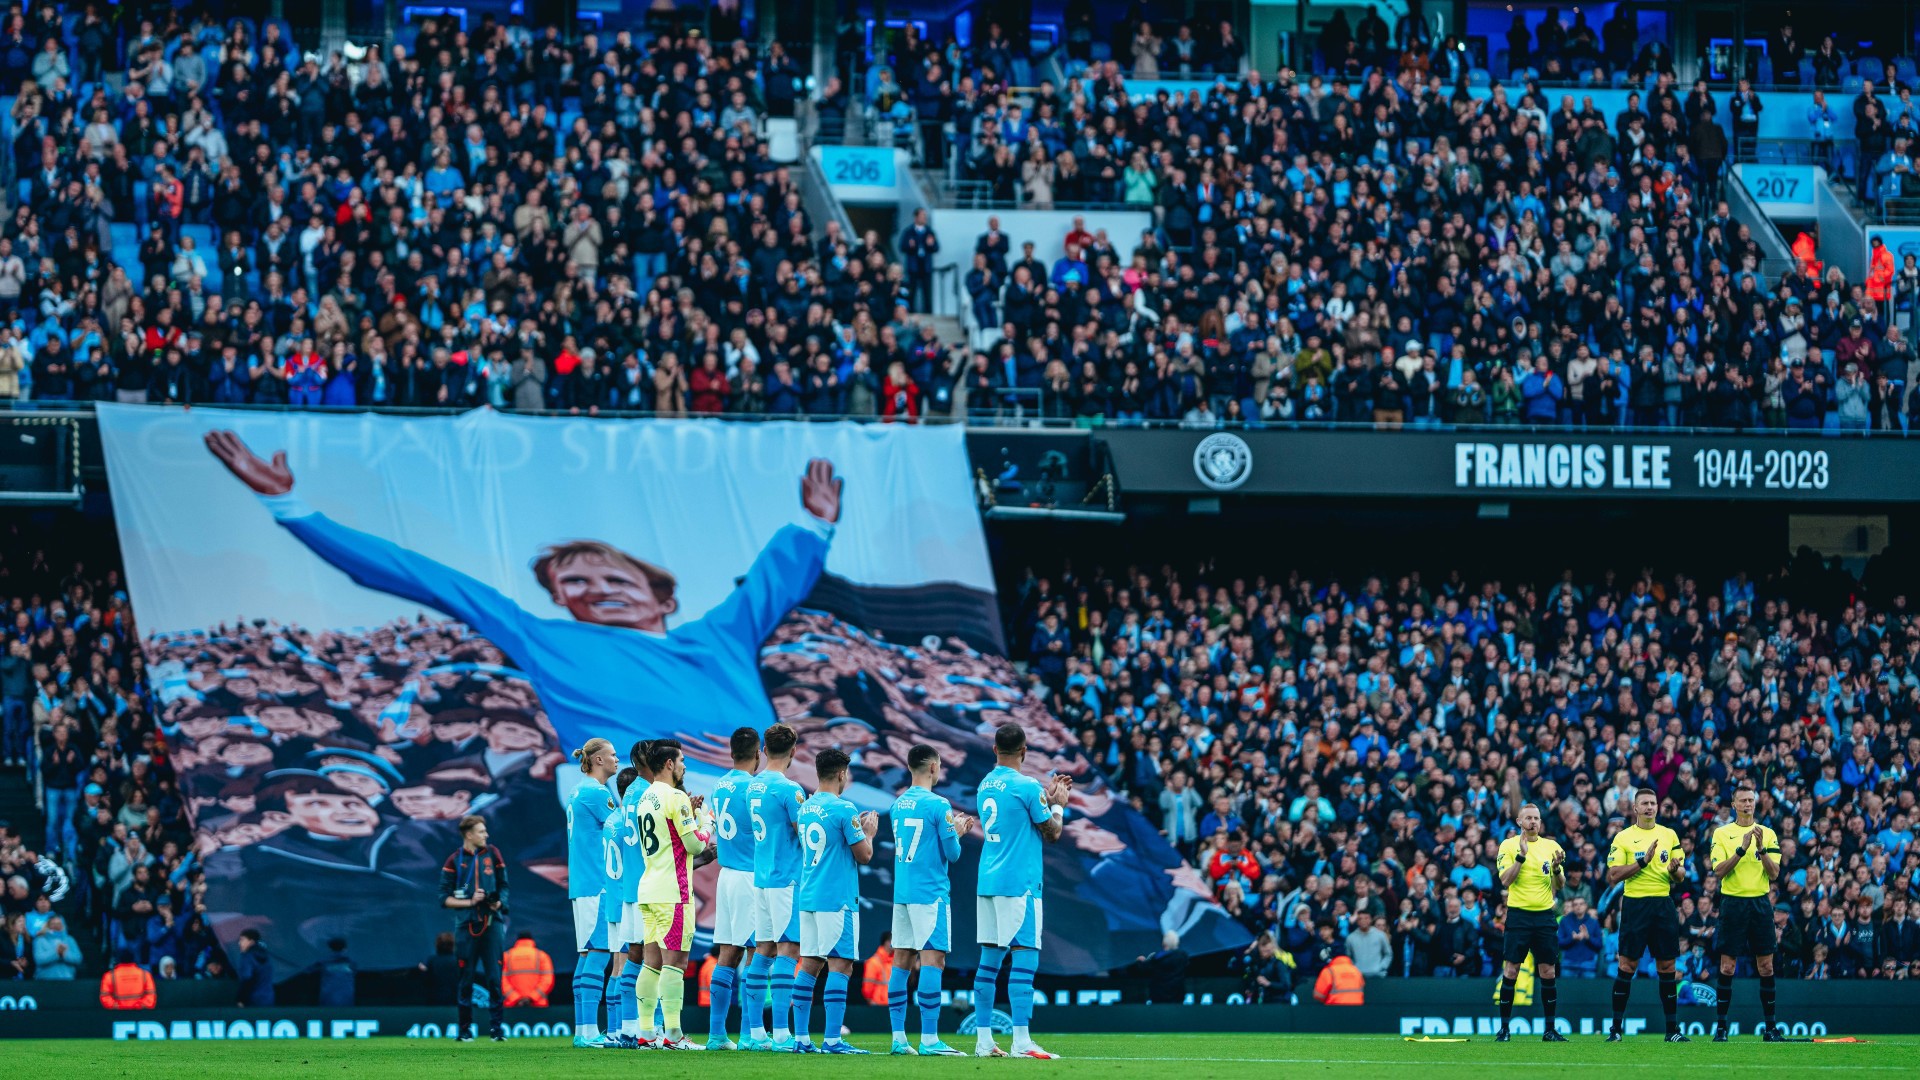 POIGNANT TRIBUTE: A giant Tifo was unfurled in honour of the late, great Francis Lee.